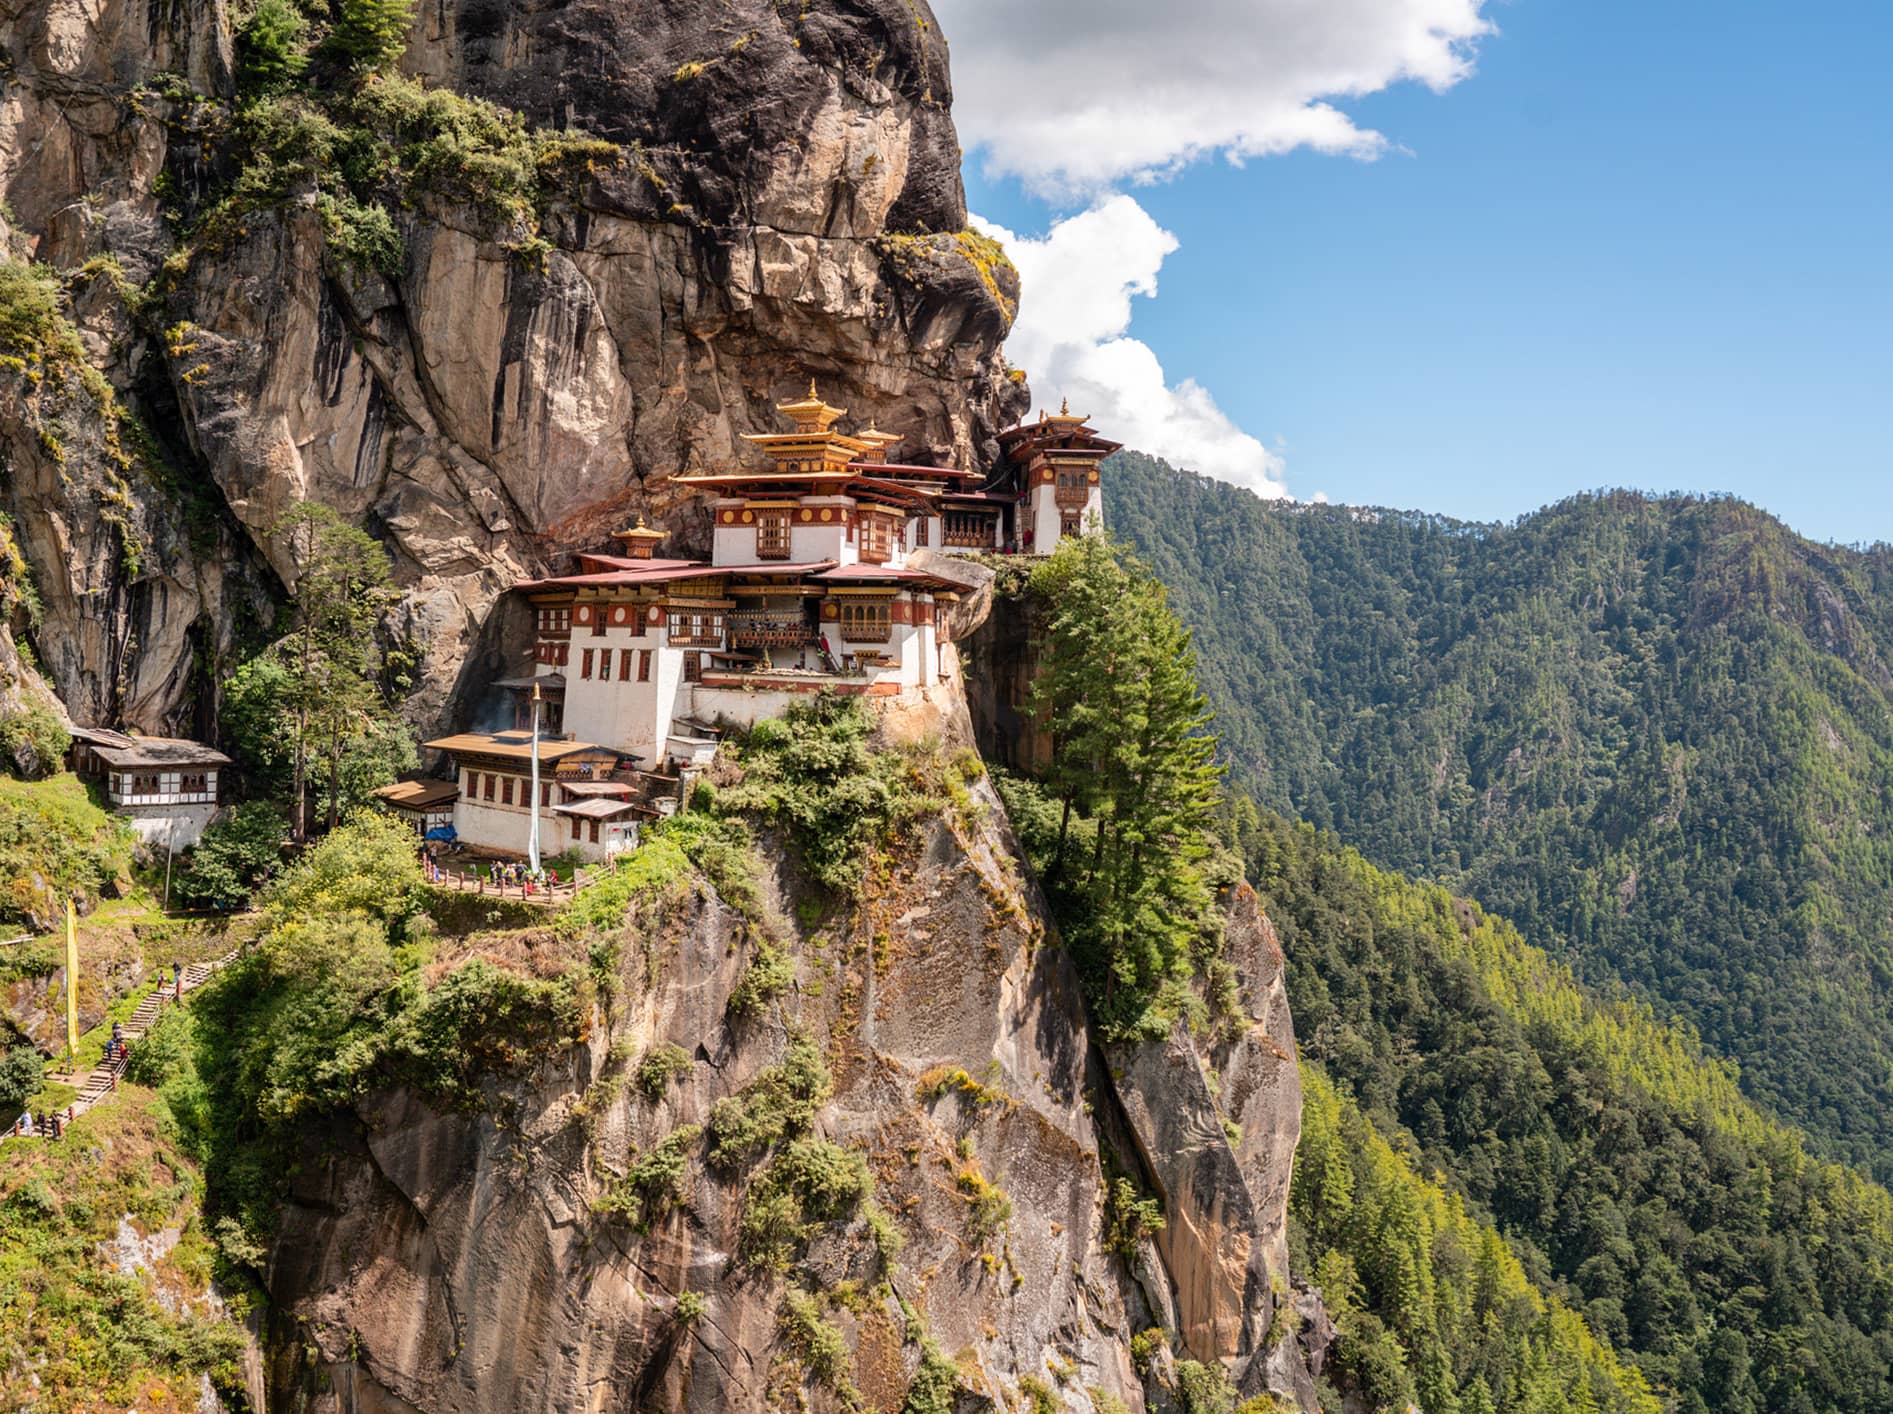  Hike to the Tiger’s Nest Monastery.  